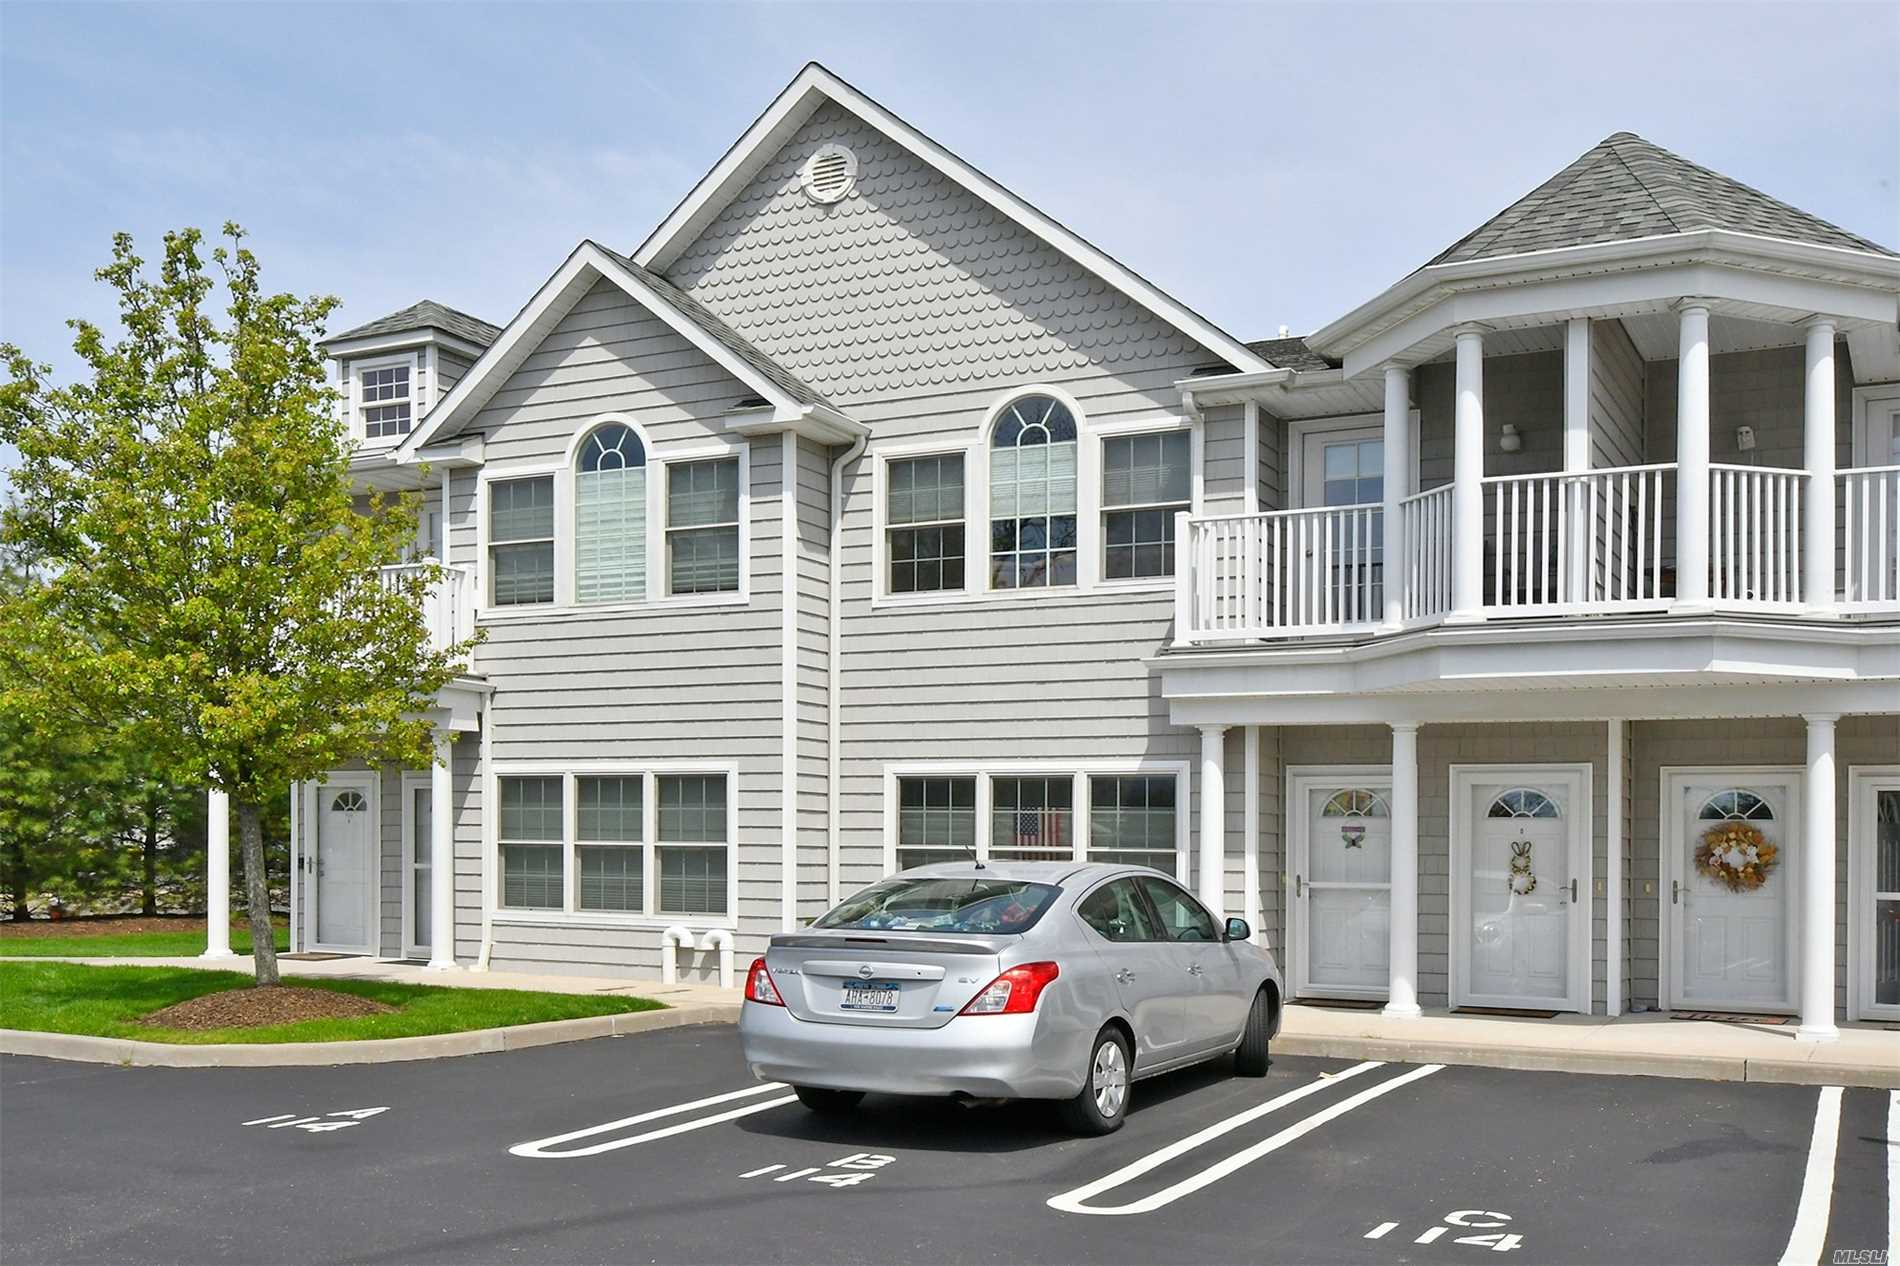 Unique Opportunity to Own a CONDO in Bethpage! Beautiful 2nd Floor Unit, Built In 2012. Eh, Open Floor Plan, Living Room & Dining Room w/Like New Cherry Kitchen w/Granite, Stainless Appliances & Gas Cooking! Tall Ceilings,  Hi Hats, Hardwood Floors, Central Air, Gas Heat, Laundry, Balcony. Hurry, Wont Last!!!